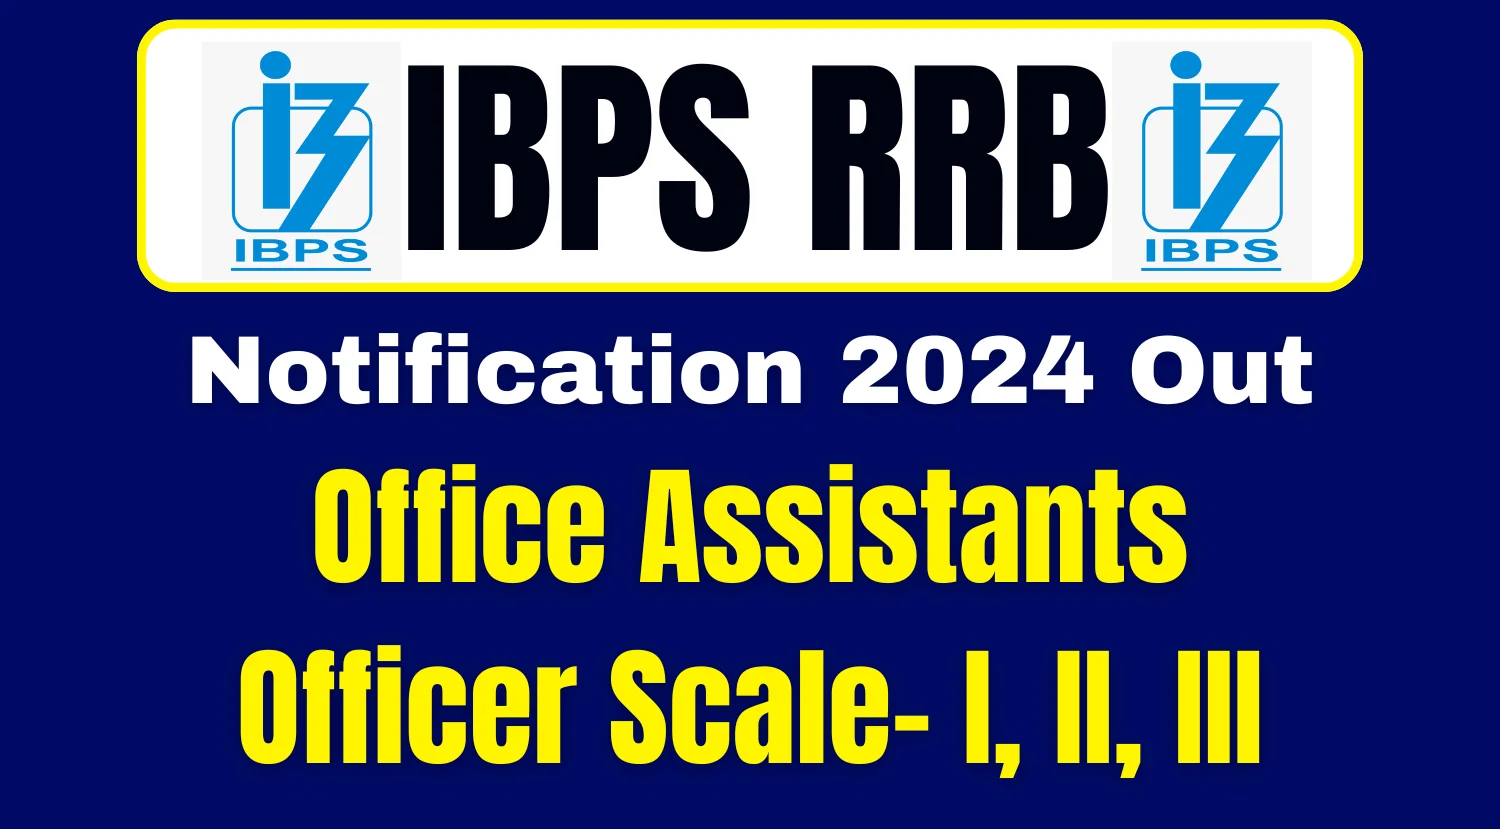 IBPS RRB Recruitment 2024 Notification Out for CRP-13 Office Assistants, Officer Scale- I, II, III Vacancies